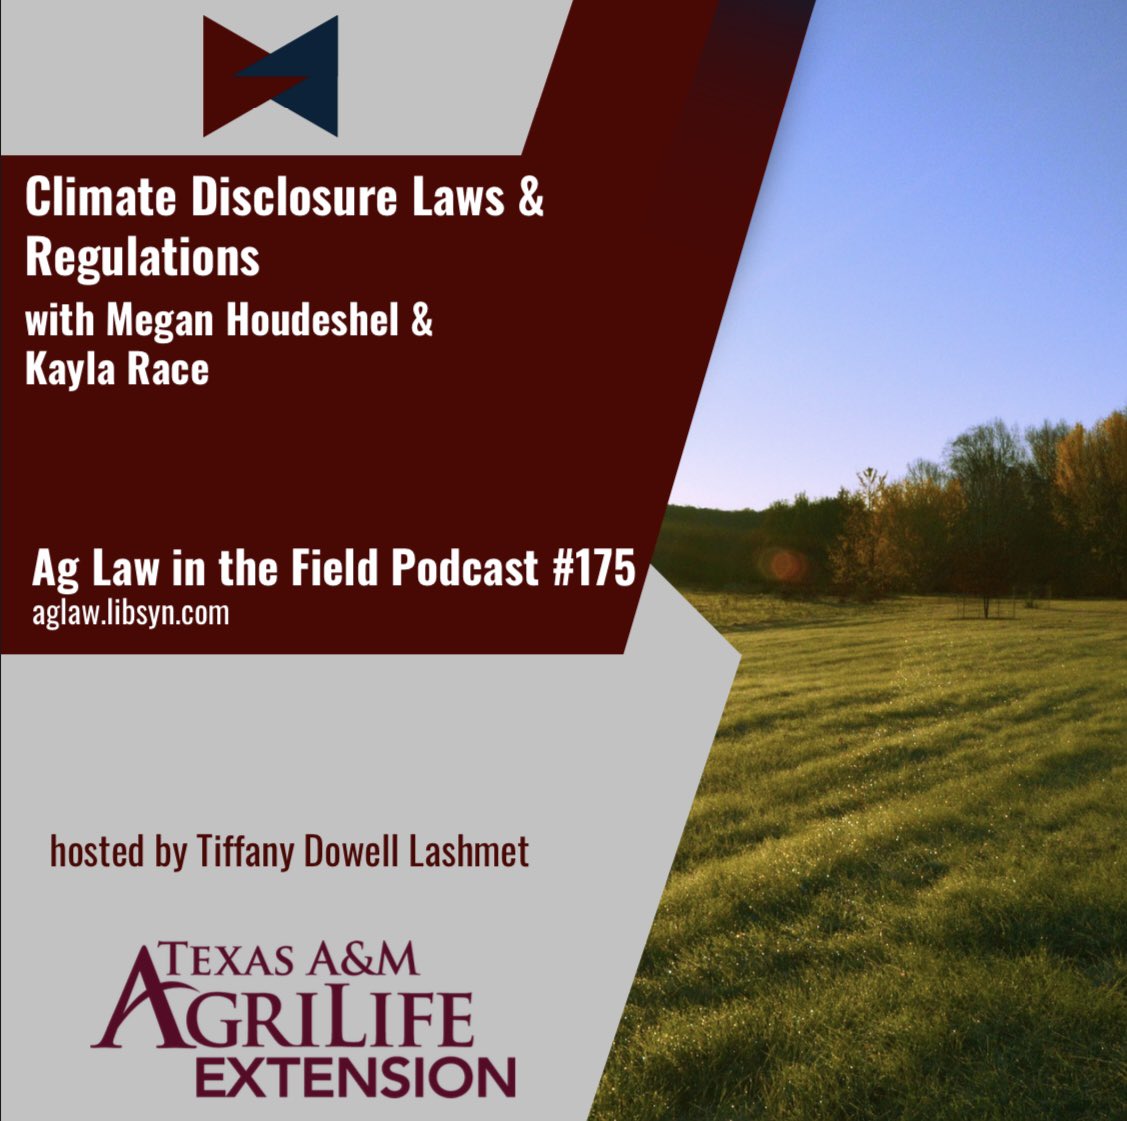 On both the state and federal level, there are new laws when it comes to climate disclosures. How might this impact agriculture? Find out today on the Ag Law in the Field Podcast. aglaw.libsyn.com/episode-175-me…